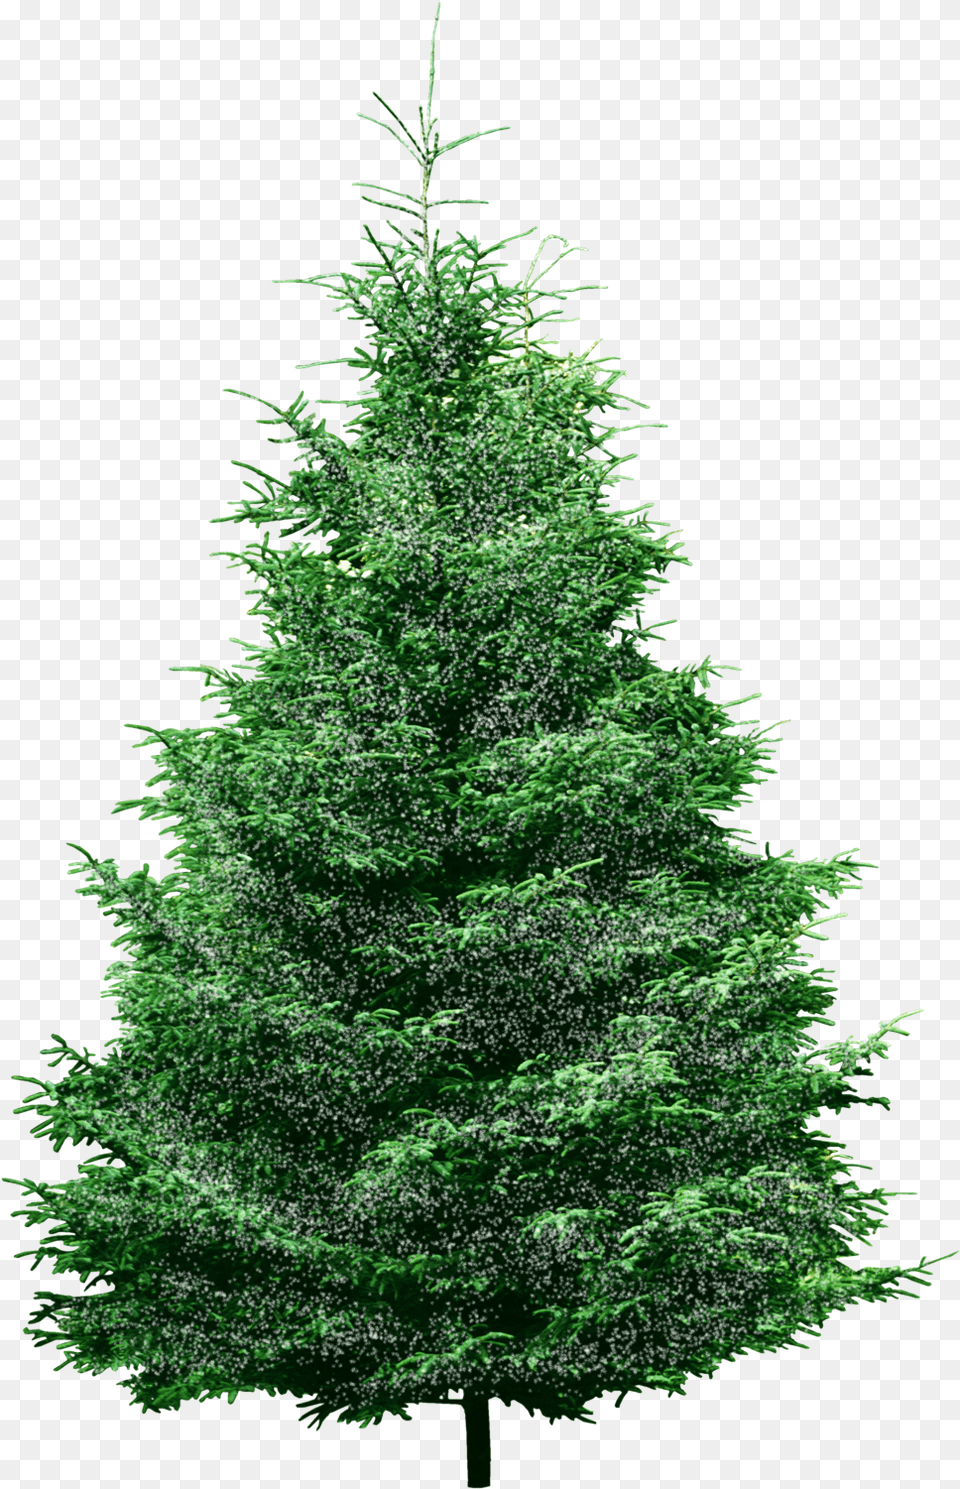 Spruce Tree U2013 Sweet Pea Machine Embroidery Designs Transparent Background Pine Tree Transparent Clipart, Fir, Plant, Green, Conifer Png